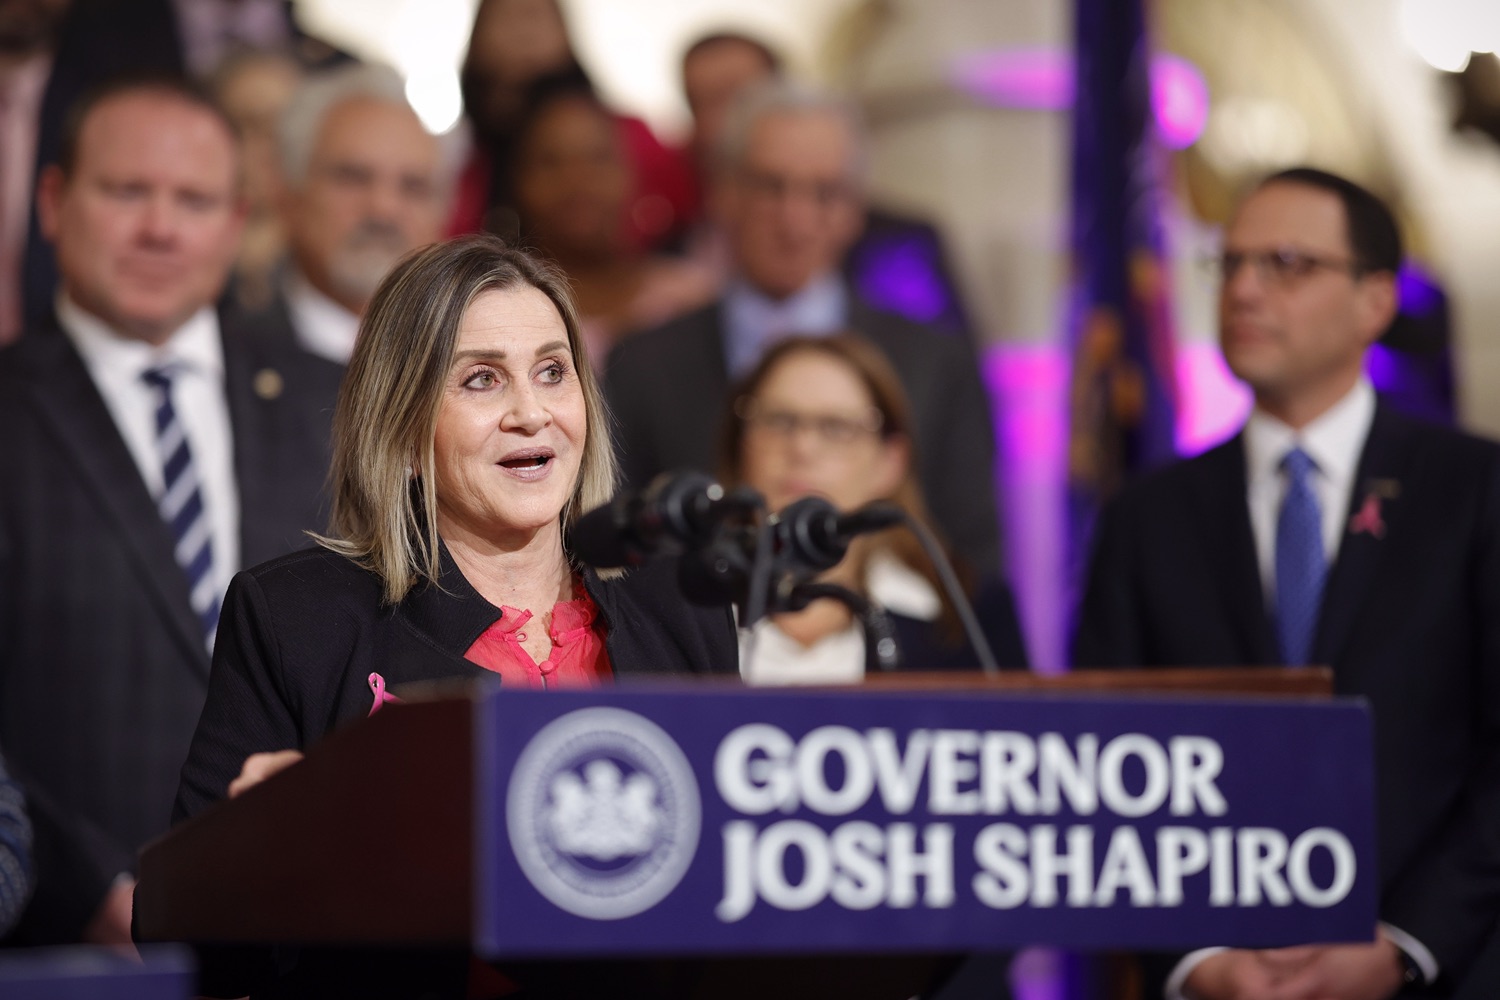 Governor Josh Shapiro signed the first bill of his Administration - Act 1 of 2023, a first-of-its-kind law in the nation that will require insurers to cover preventive breast and ovarian cancer screenings for high-risk women at no cost. MAY 01, 2023 - HARRISBURG, PA<br><a href="https://filesource.amperwave.net/commonwealthofpa/photo/23041_gov_sb8_dz_003.JPG" target="_blank">⇣ Download Photo</a>